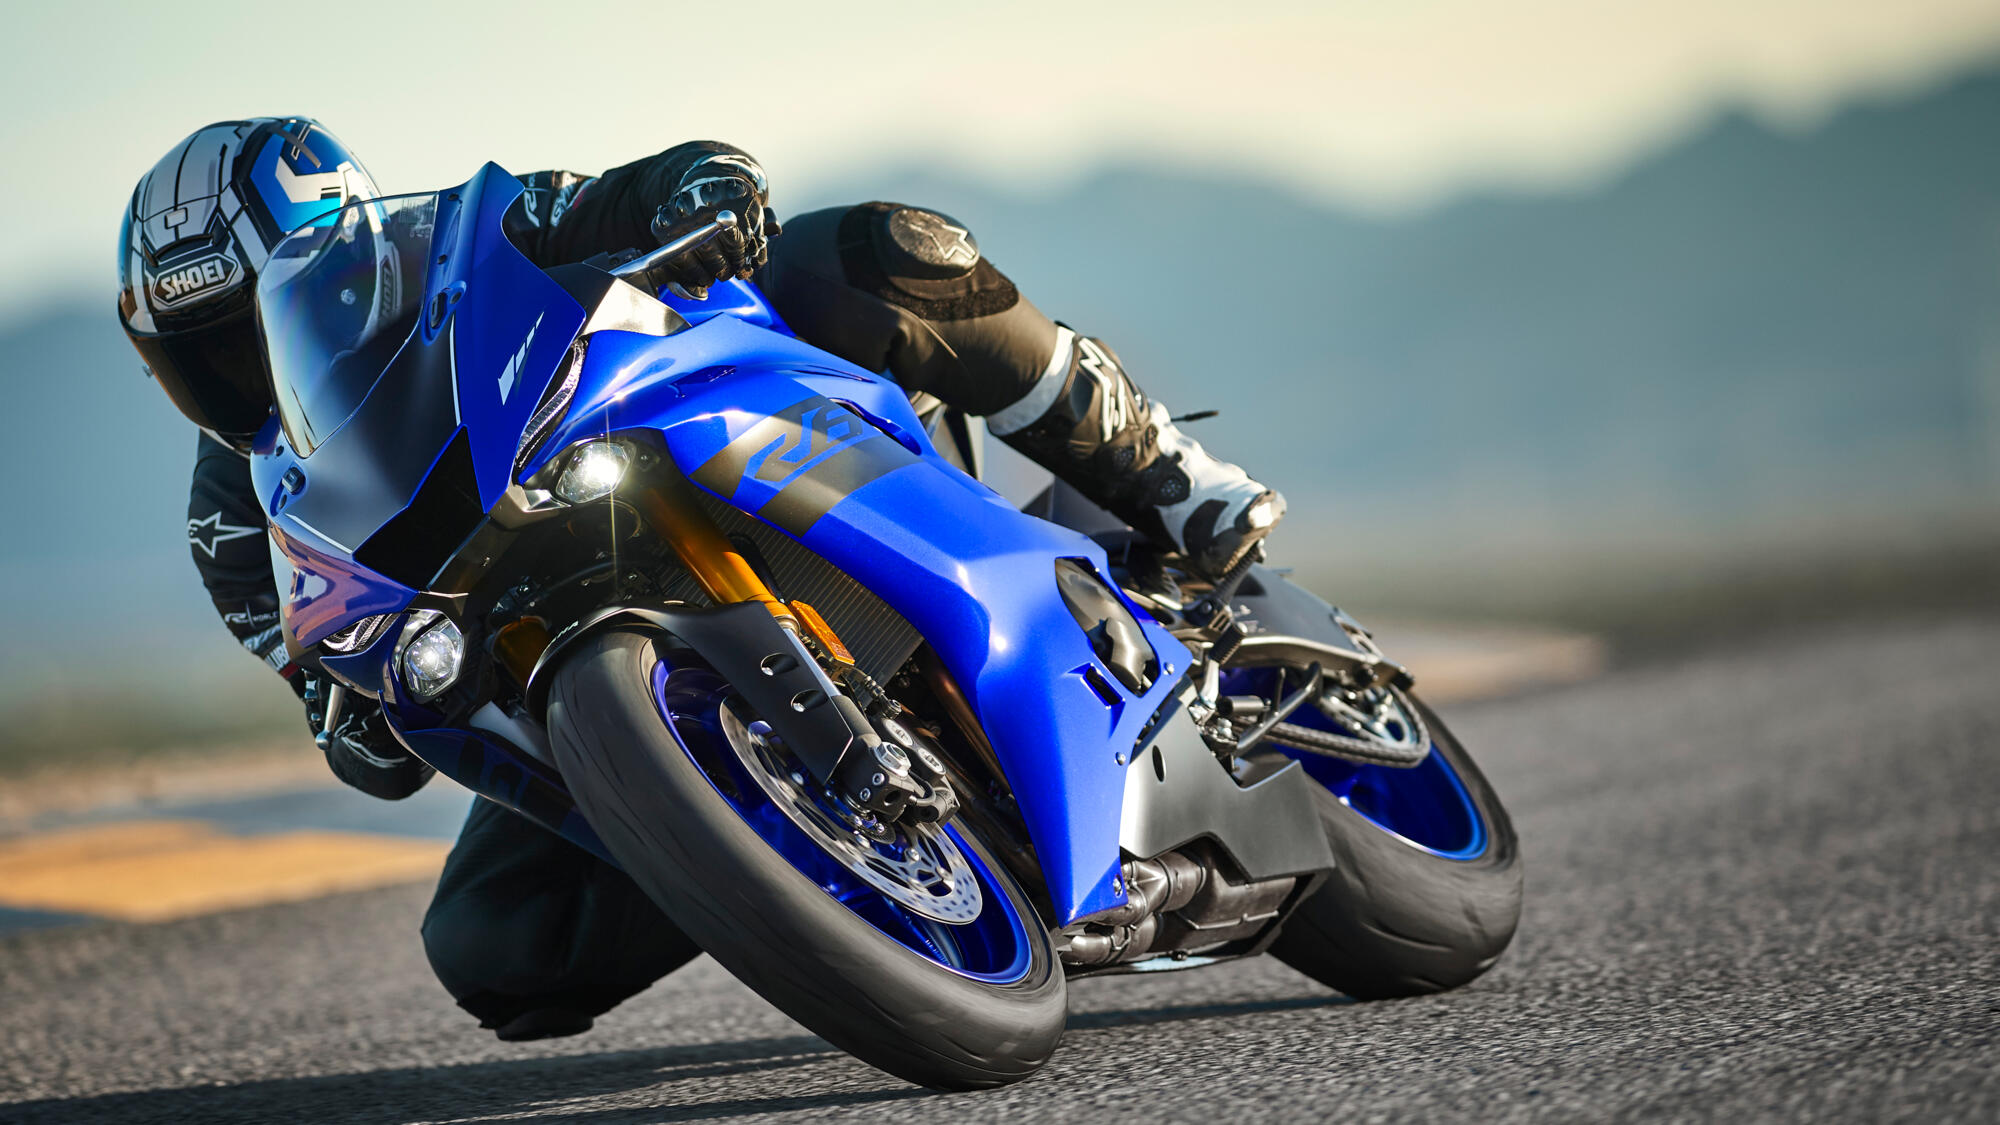 YZF-R6 - Motorcycles - YME Website